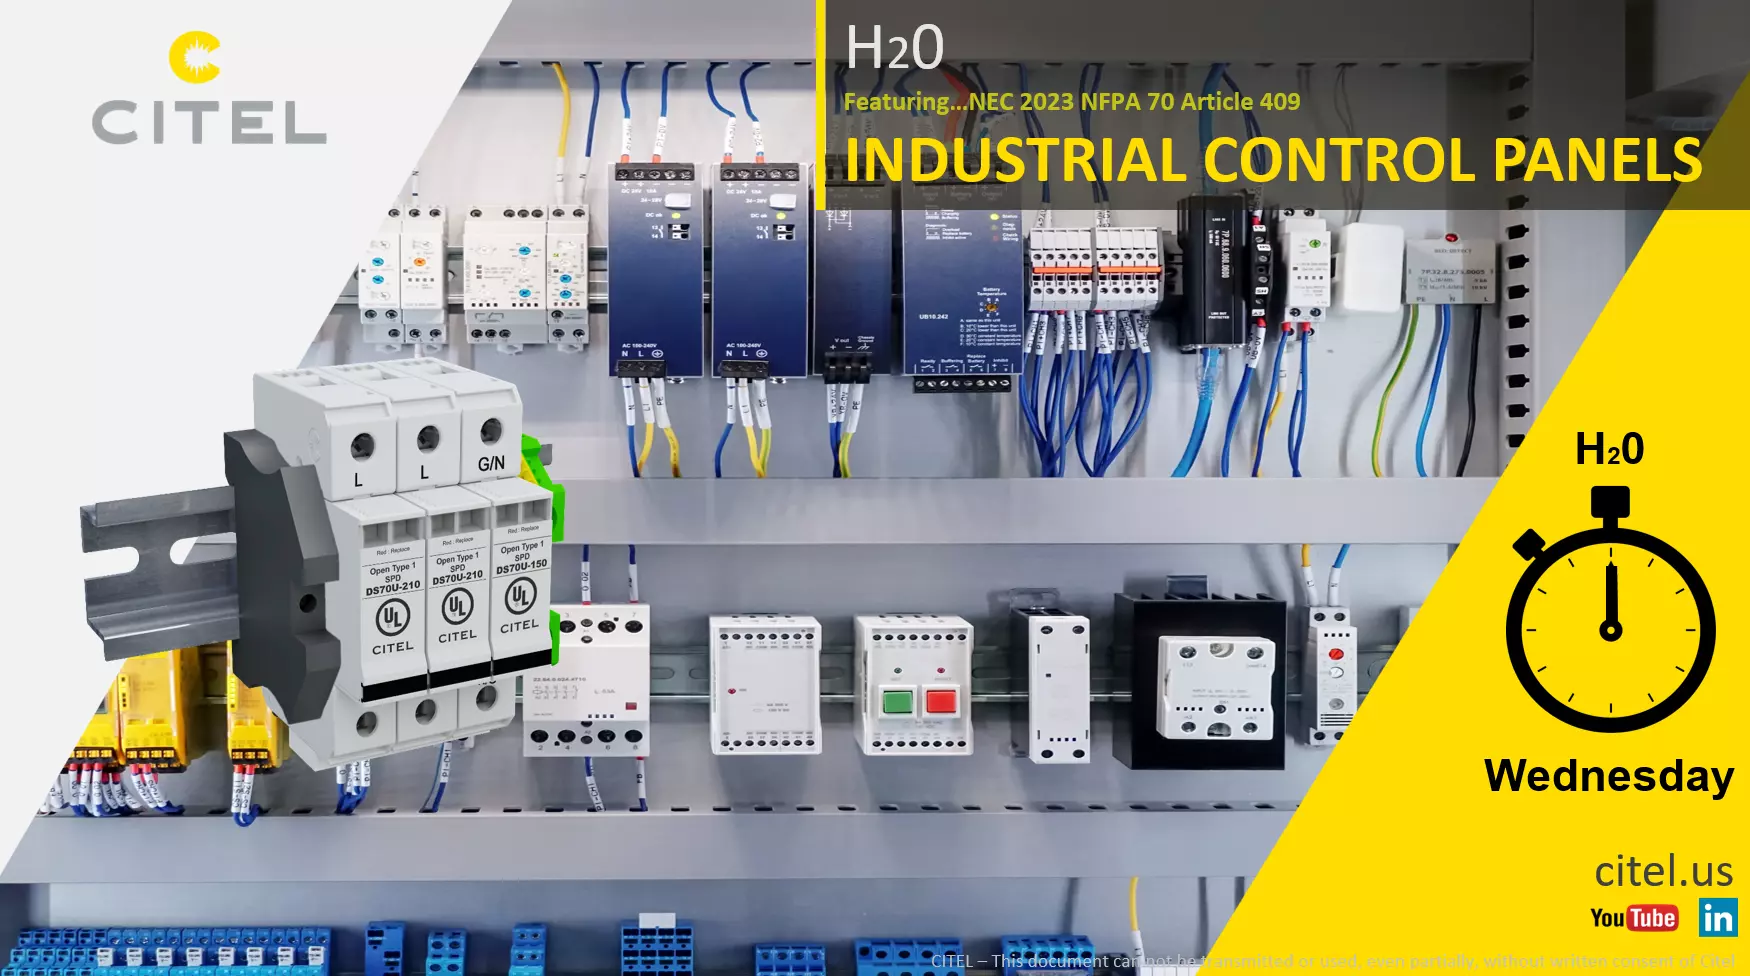 H20 Webinar Featuring NEC 2023 Article 409 Industrial Control Panels